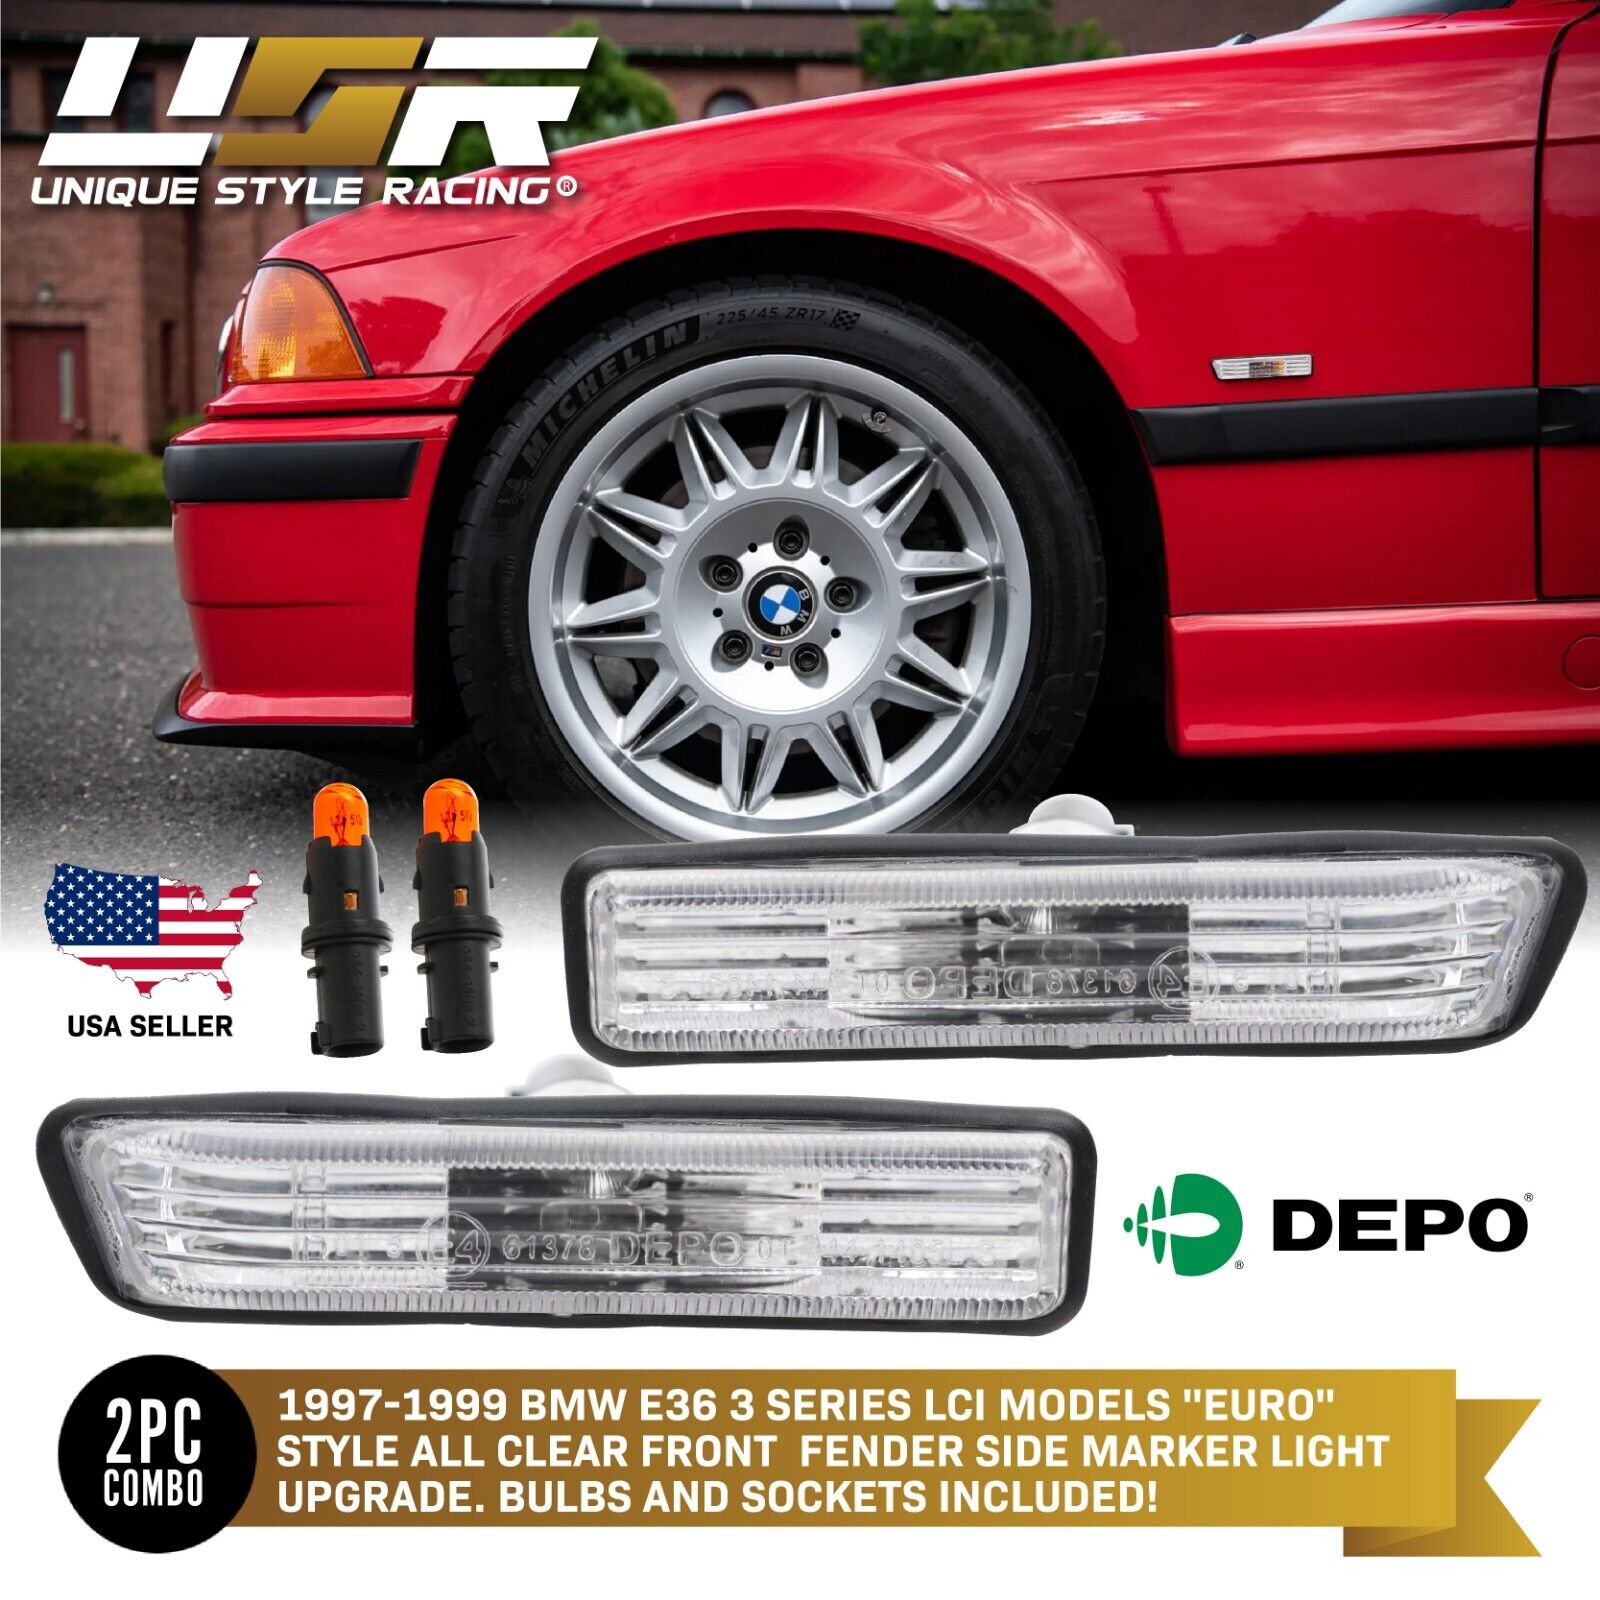 DEPO Euro Clear Fender Side Markers Lights For 1997-1999 BMW E36 3 Series LCI